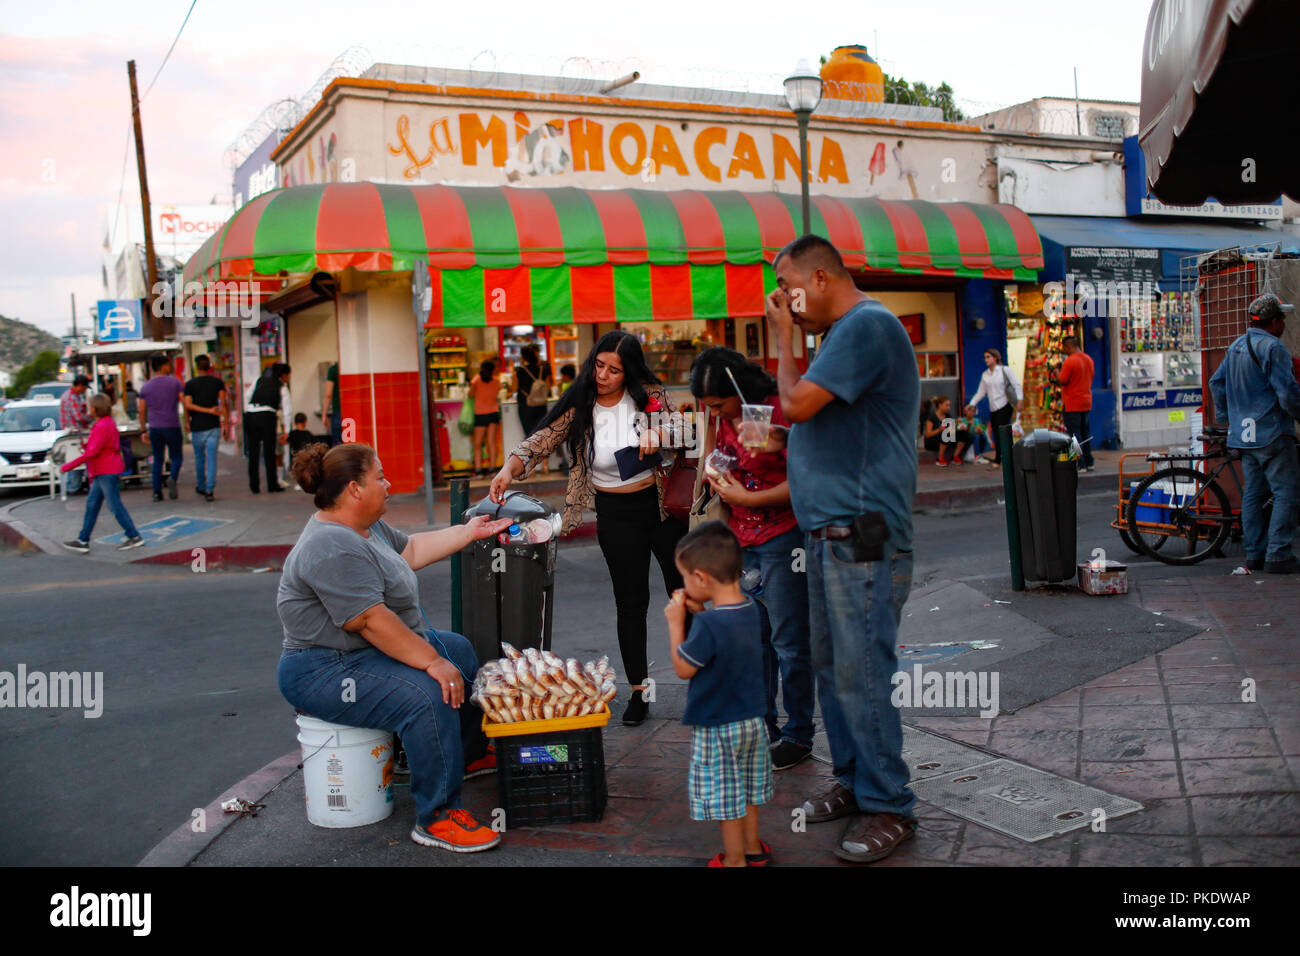 Sale of products on the ramrod. in the background LA MICHOACANA.   Daily life in the historic center of Hermosillo, Sonora, Mexico. Street Photography. (Photo: Luis Gutierrez /NortePhoto) Stock Photo